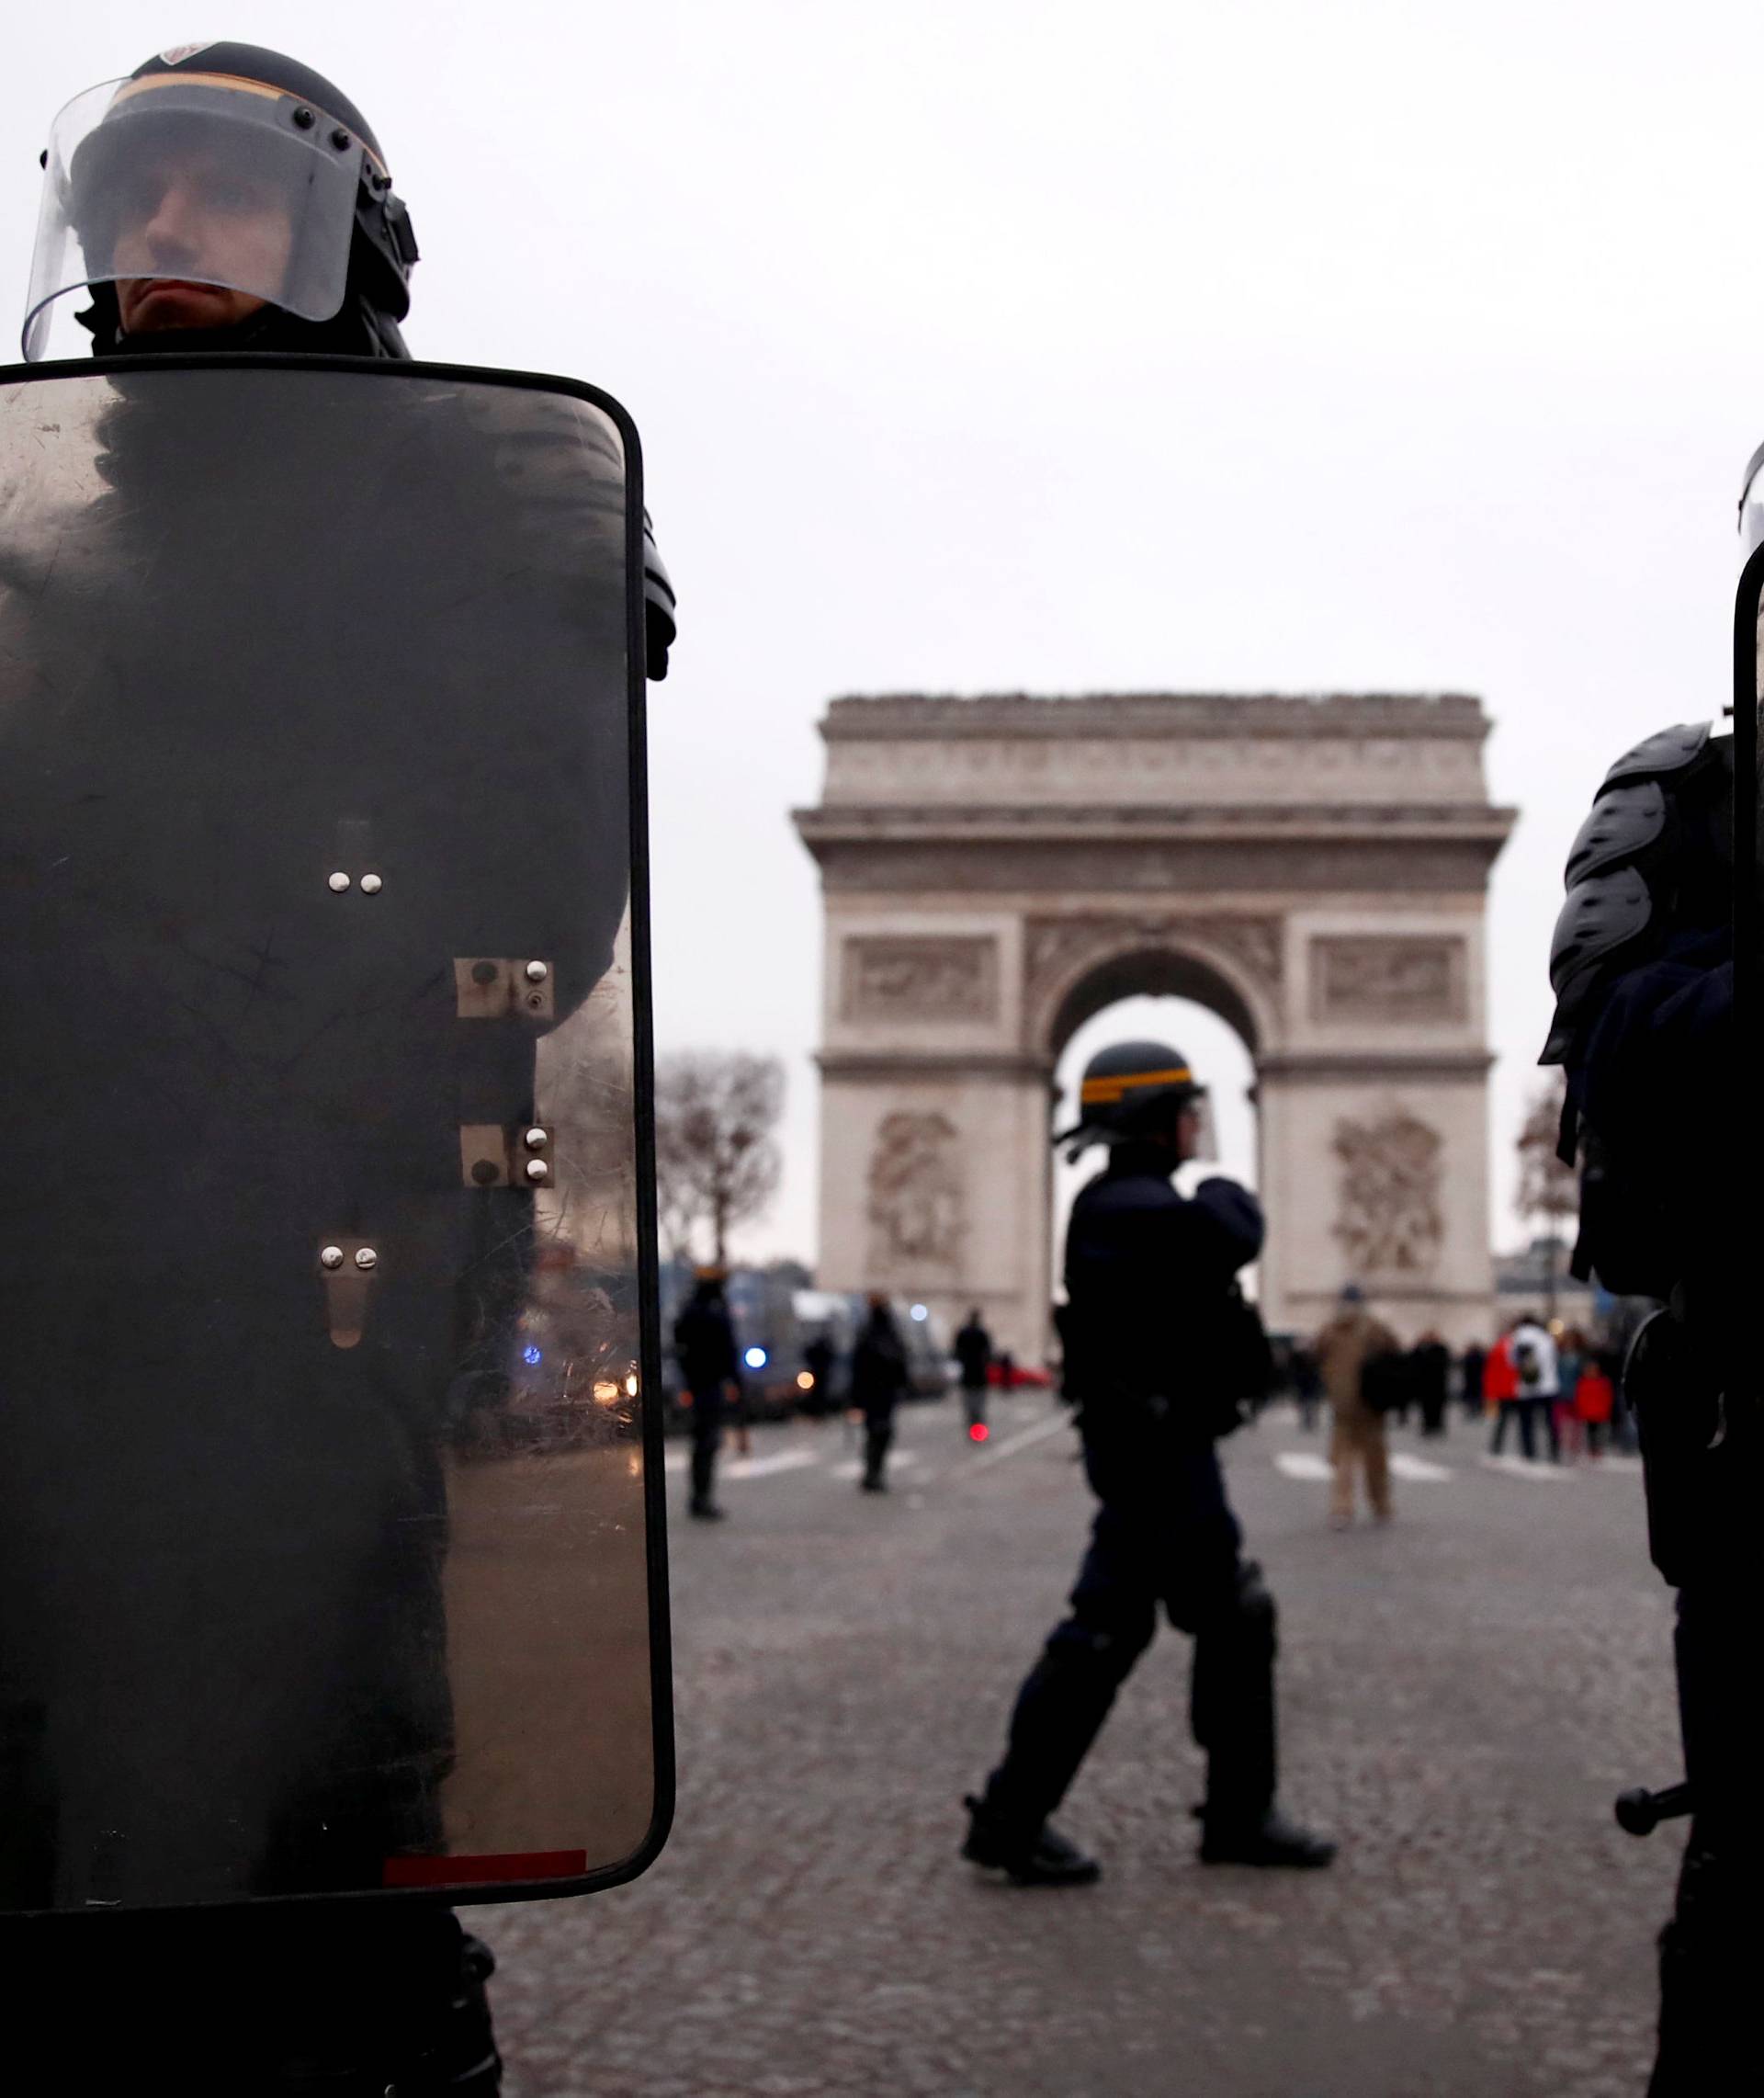 Riot police officers stand guard during a demonstration by the "yellow vests" movement on the Champs Elysees near the Arc de Triomphe in Paris